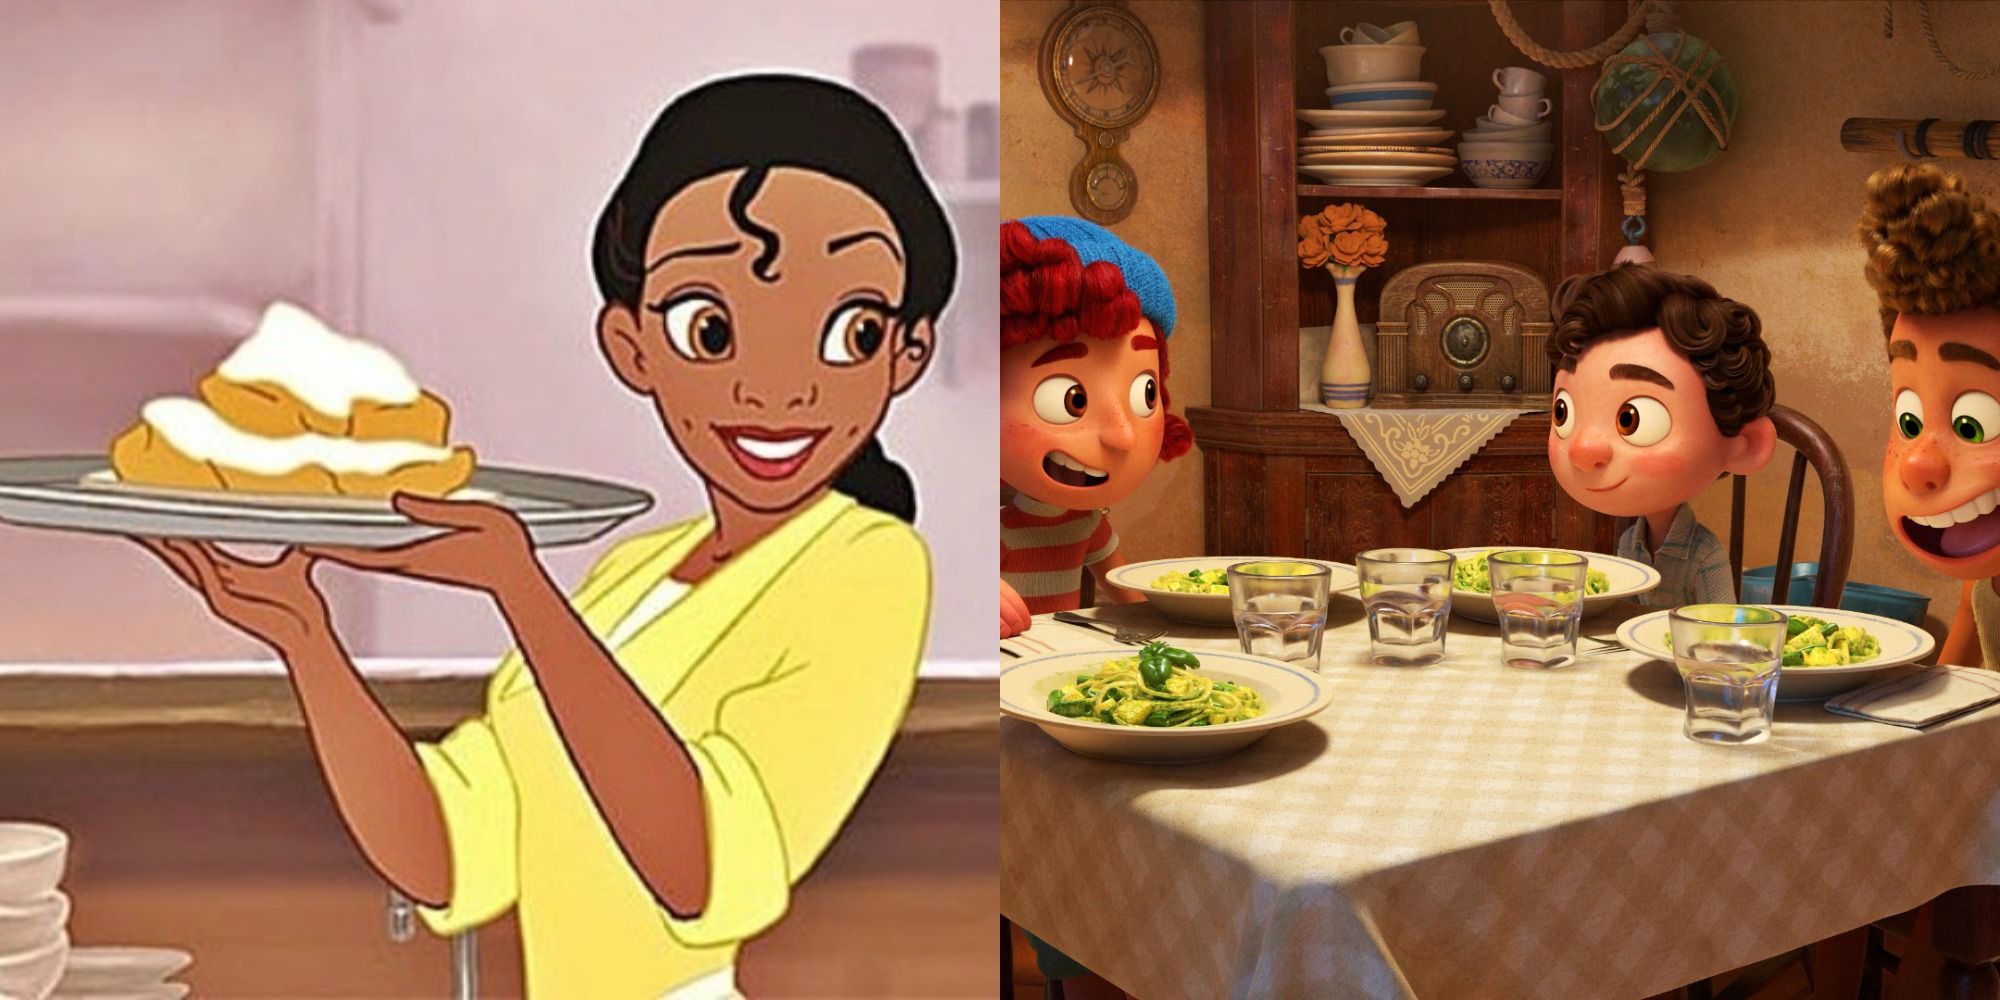 A split image of Tiana holding a tray of beignets and Trenette al Pesto